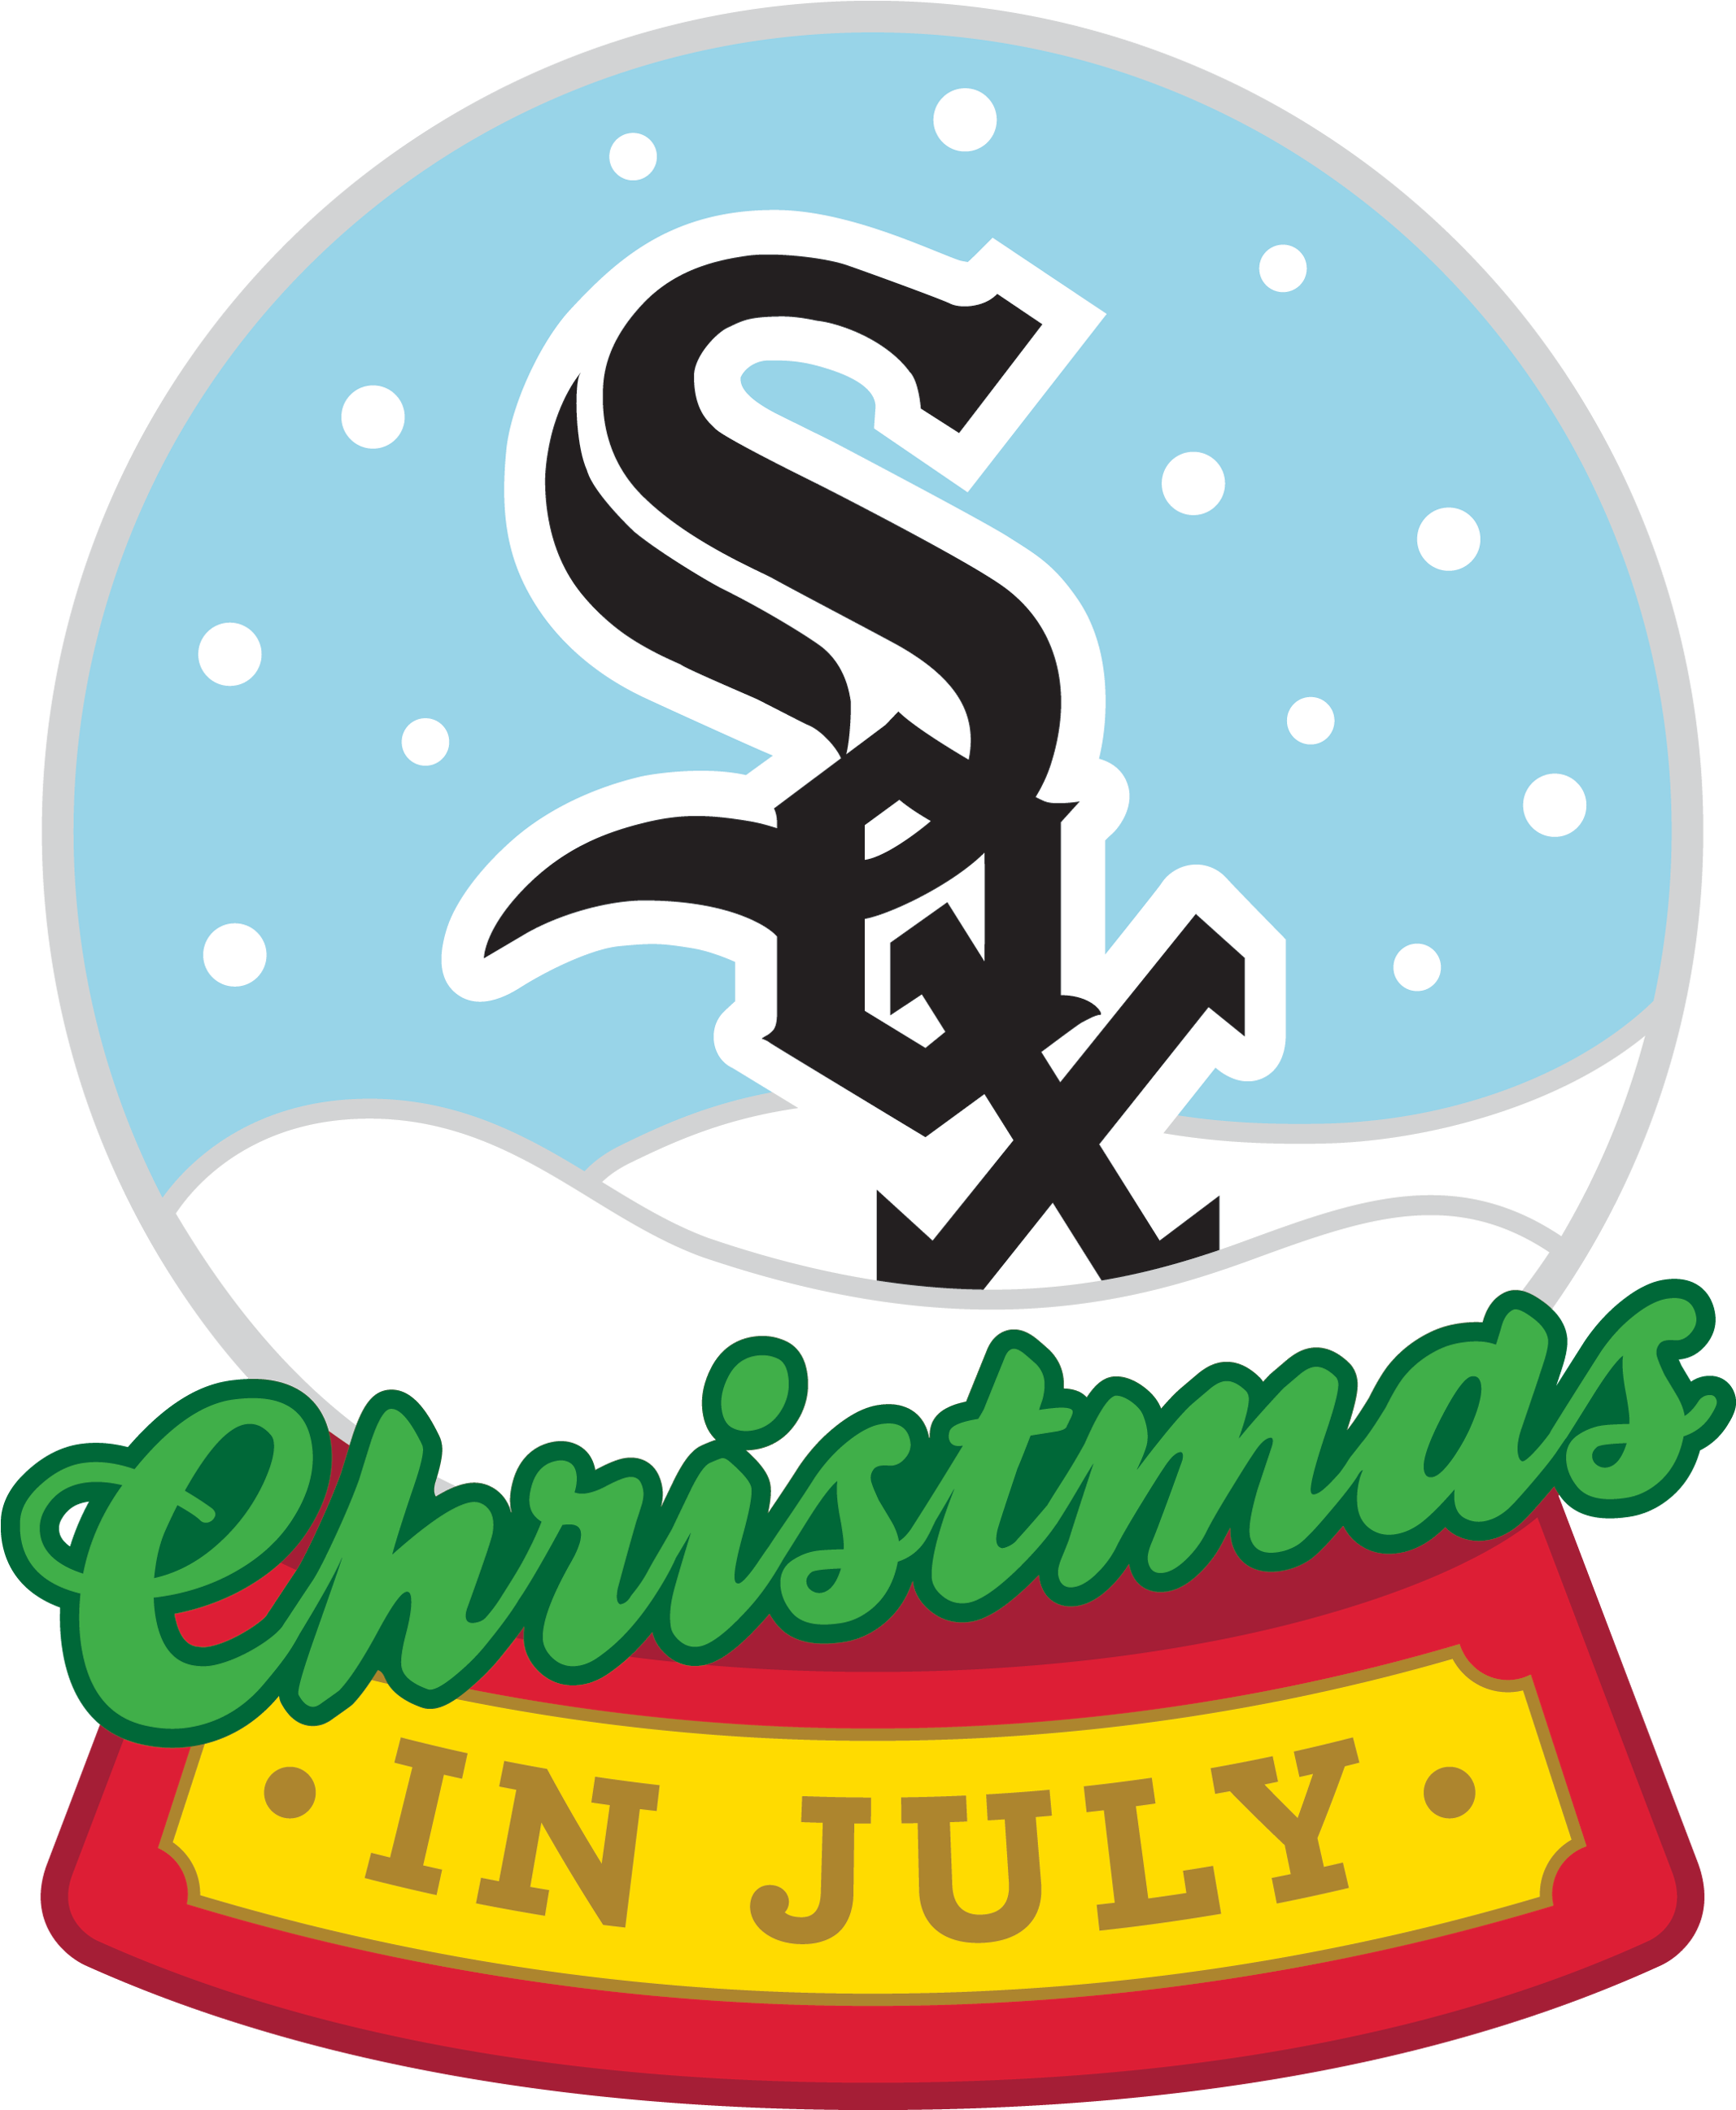 Christmas In July - Christmas In July (2608x2608)